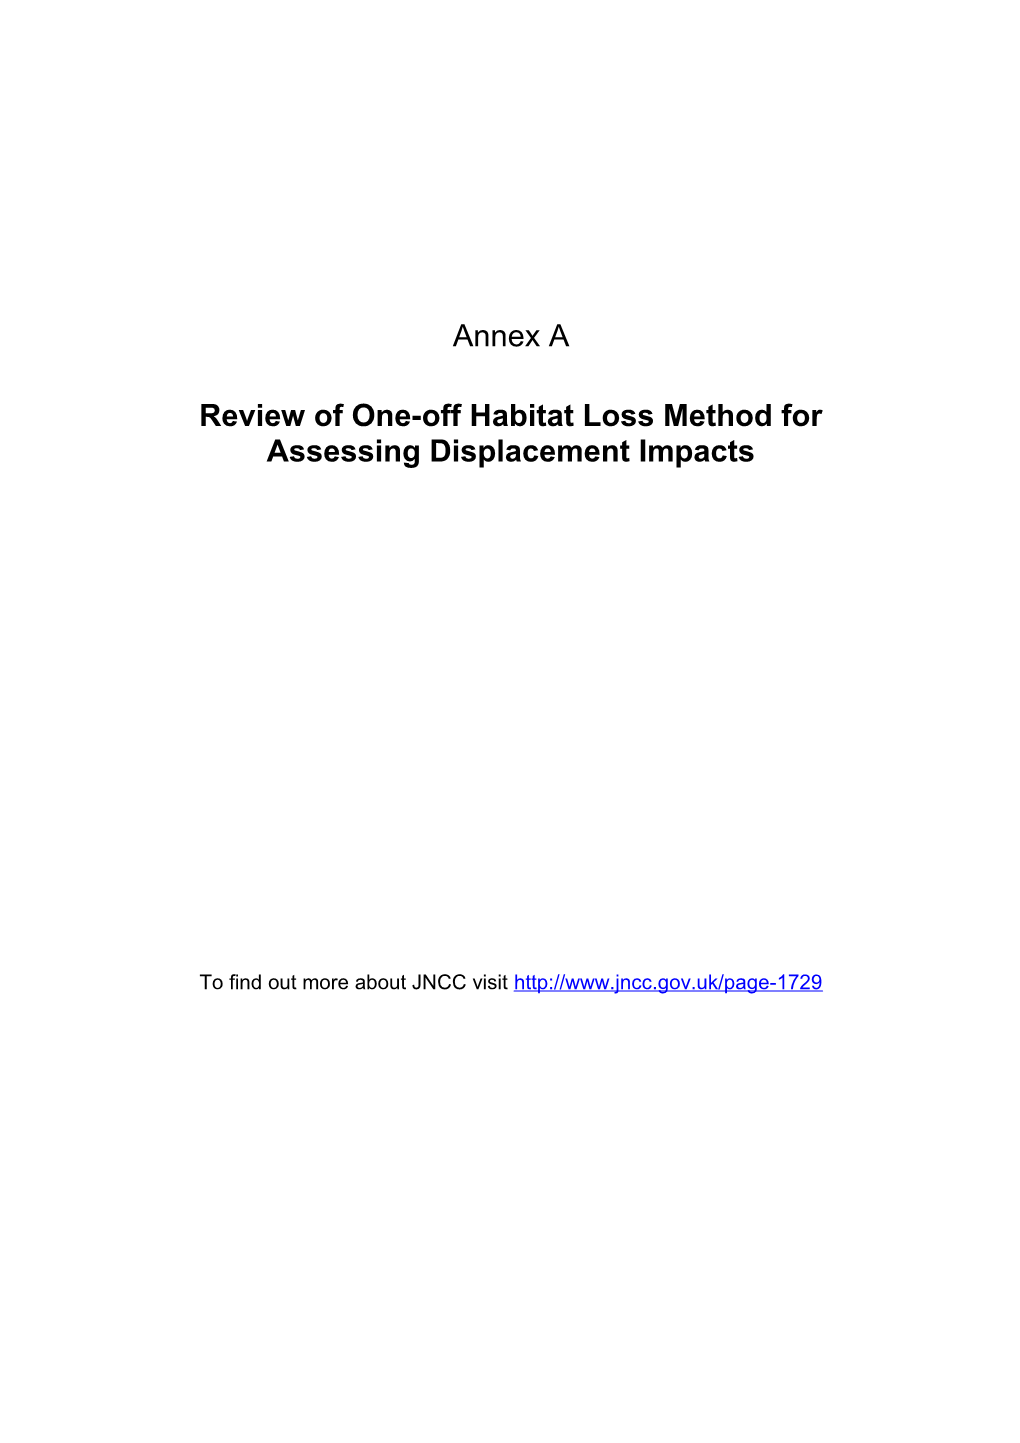 Review of One-Off Habitat Loss Method for Assessing Displacement Impacts